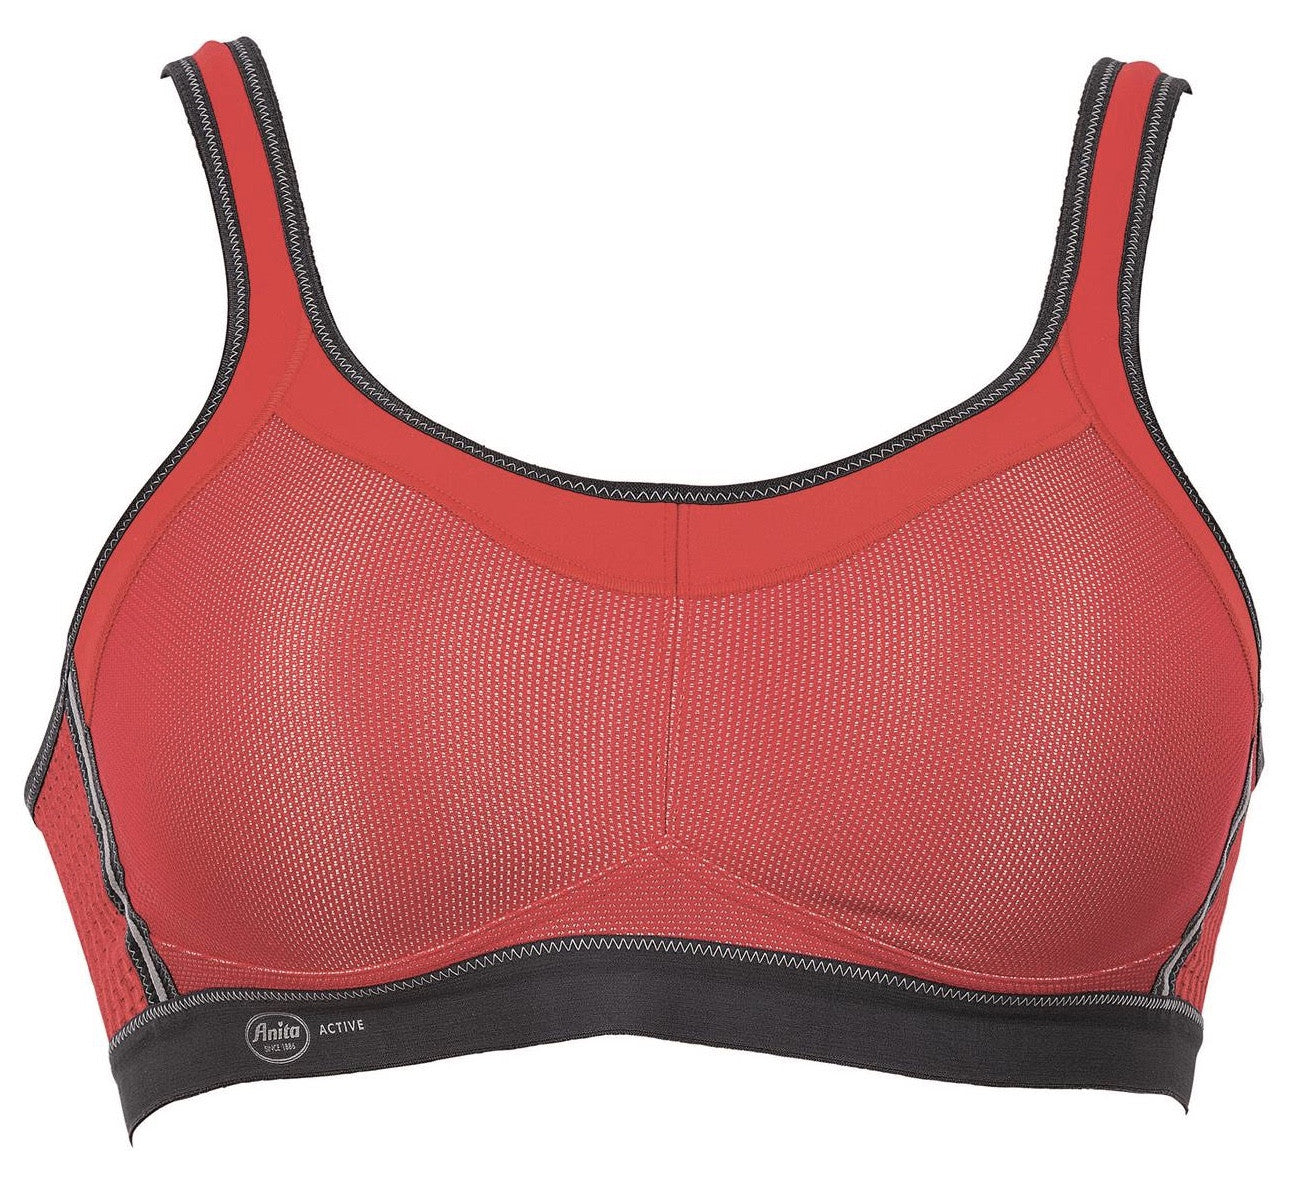 Bodywise Everyday Bra B2 - featured colours